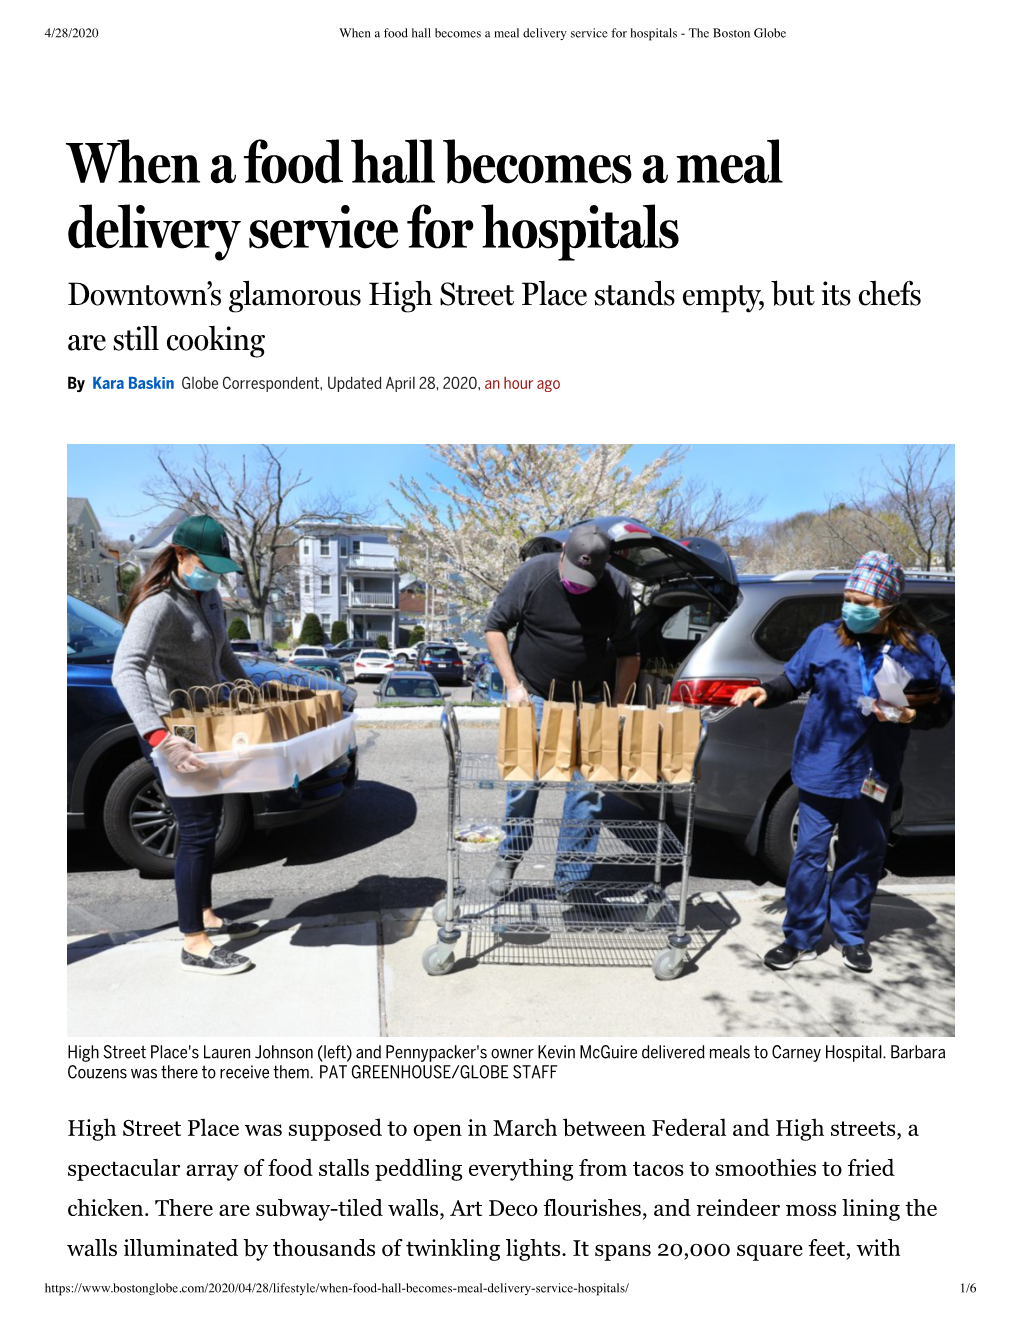 When a Food Hall Becomes a Meal Delivery Service for Hospitals - the Boston Globe